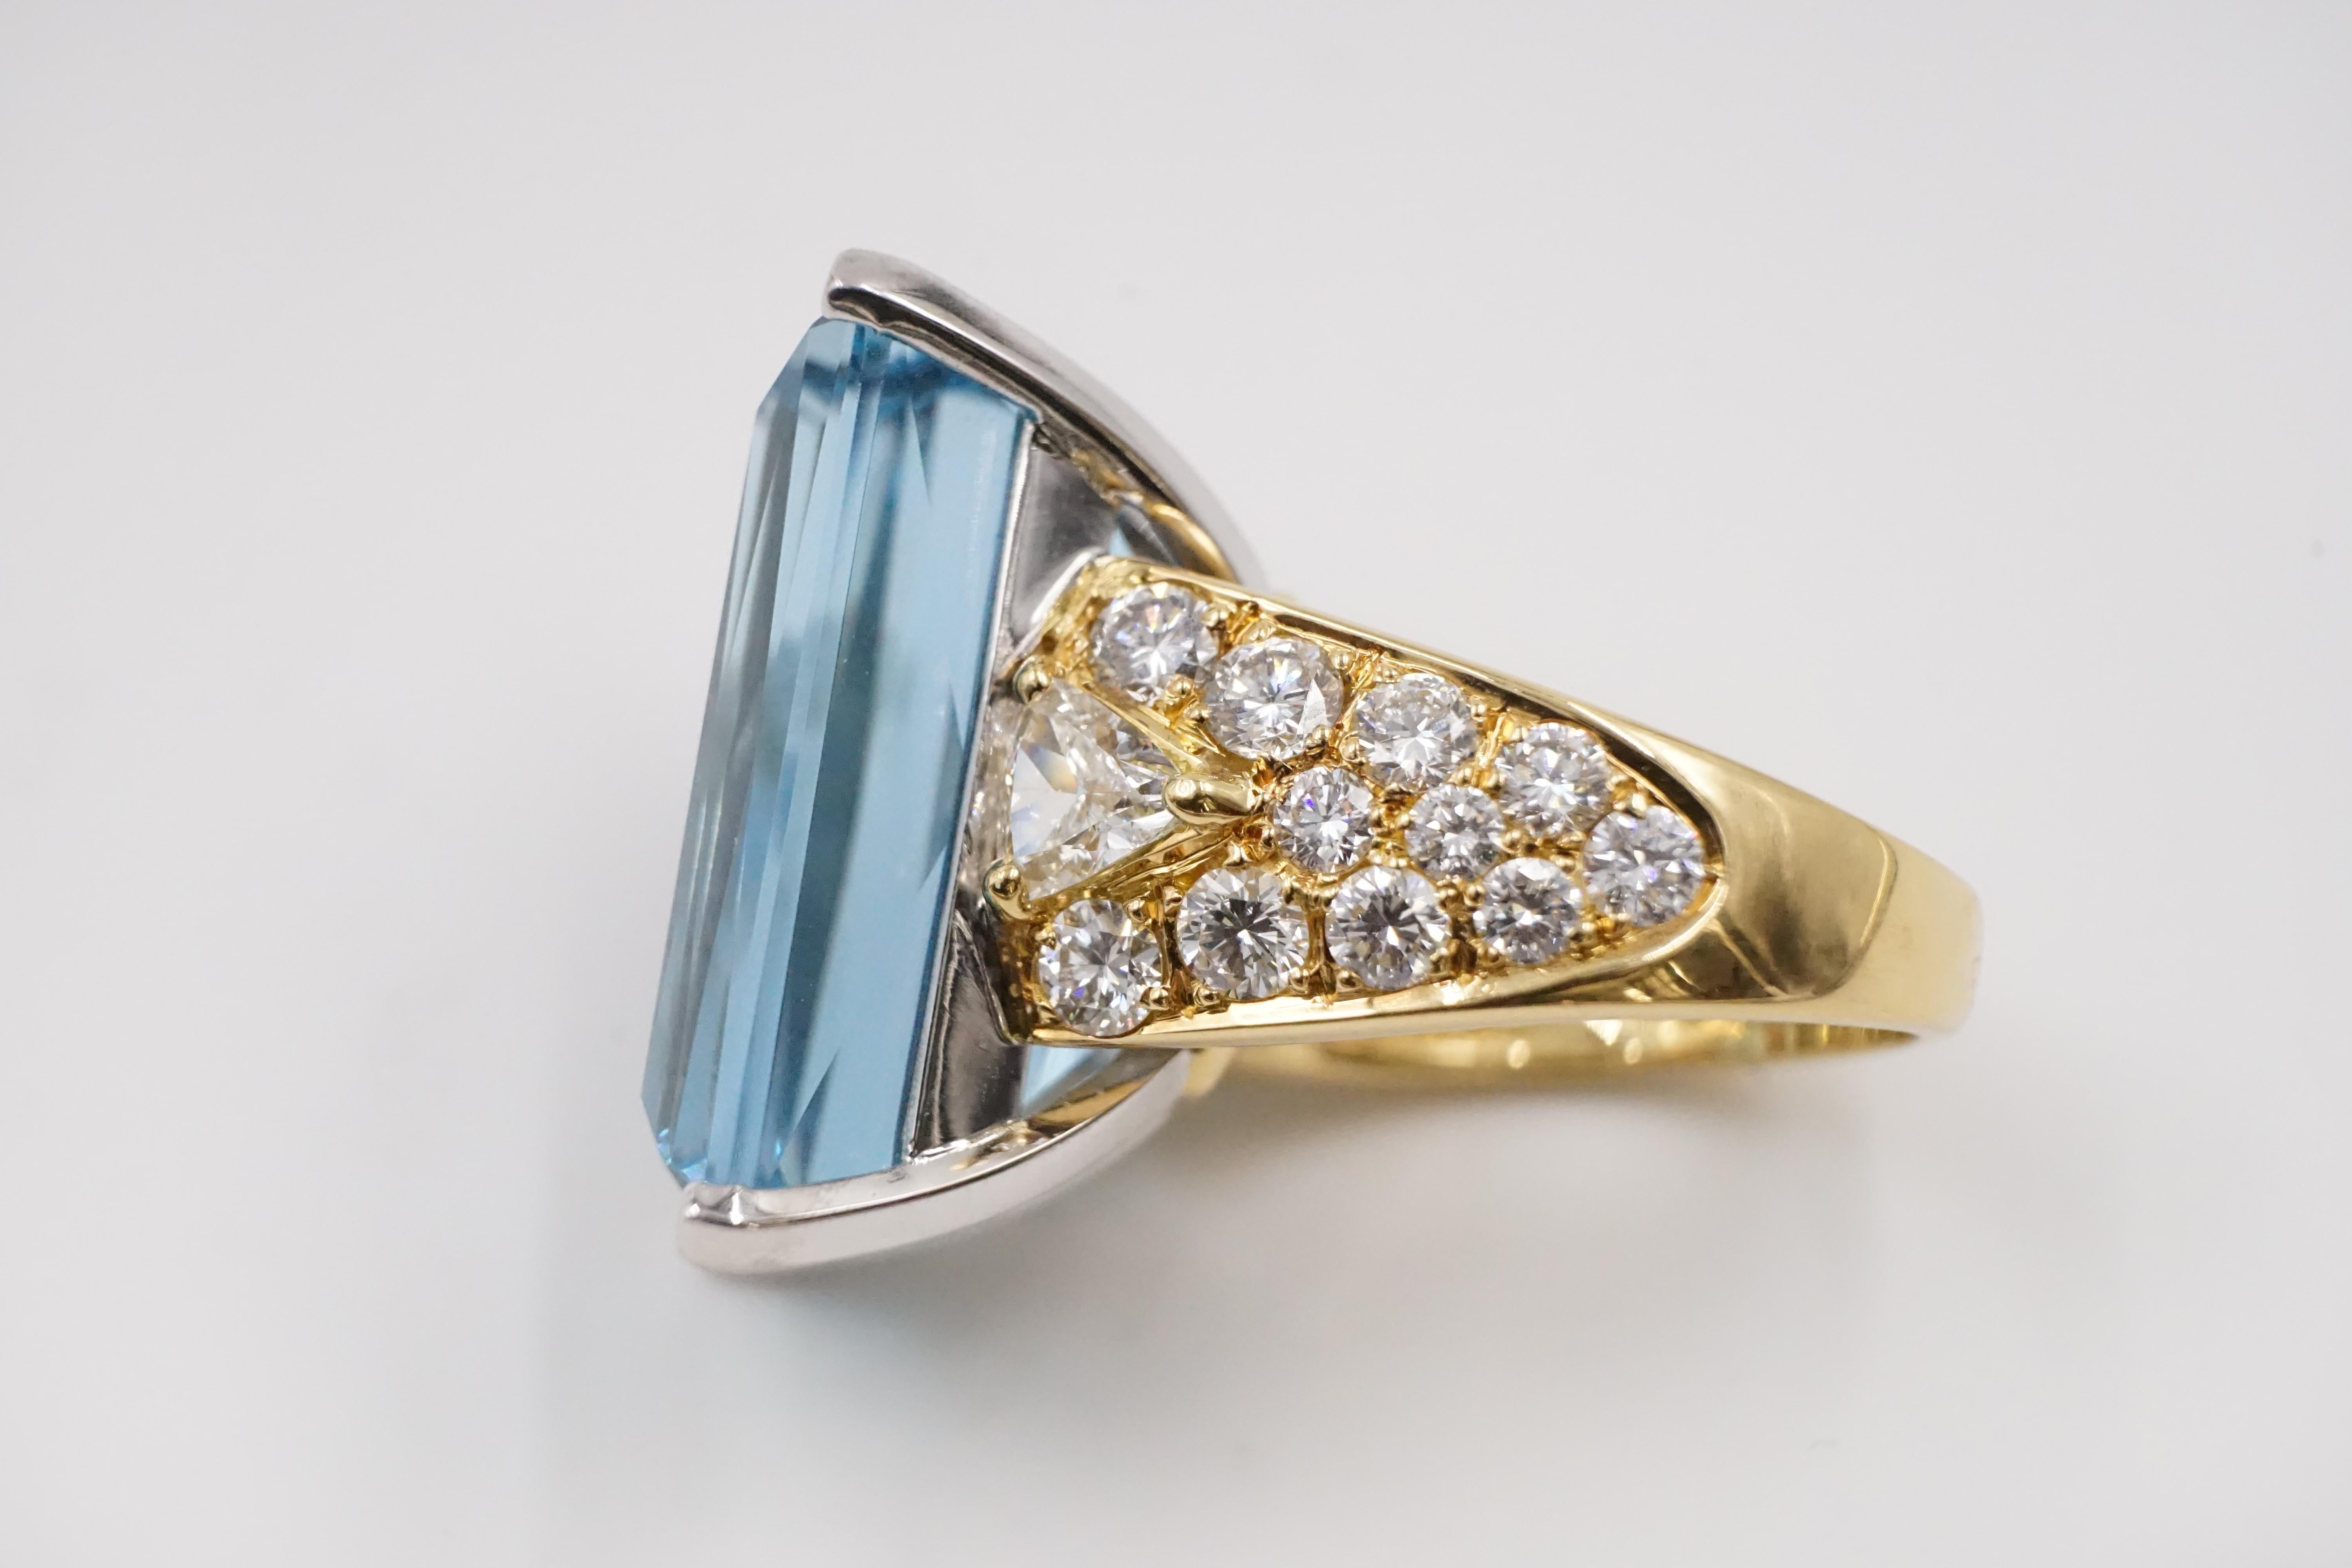 A 1980s large aquamarine, diamond and 18ct gold ring by Repossi the aquamarine itself measures W:1.55cm H: 2.4cm D: approx 1.27cm and weight approx over 40 carat. 

There are 24 diamonds on the shoulder 2 triangle cut and 22 smaller brilliant cut